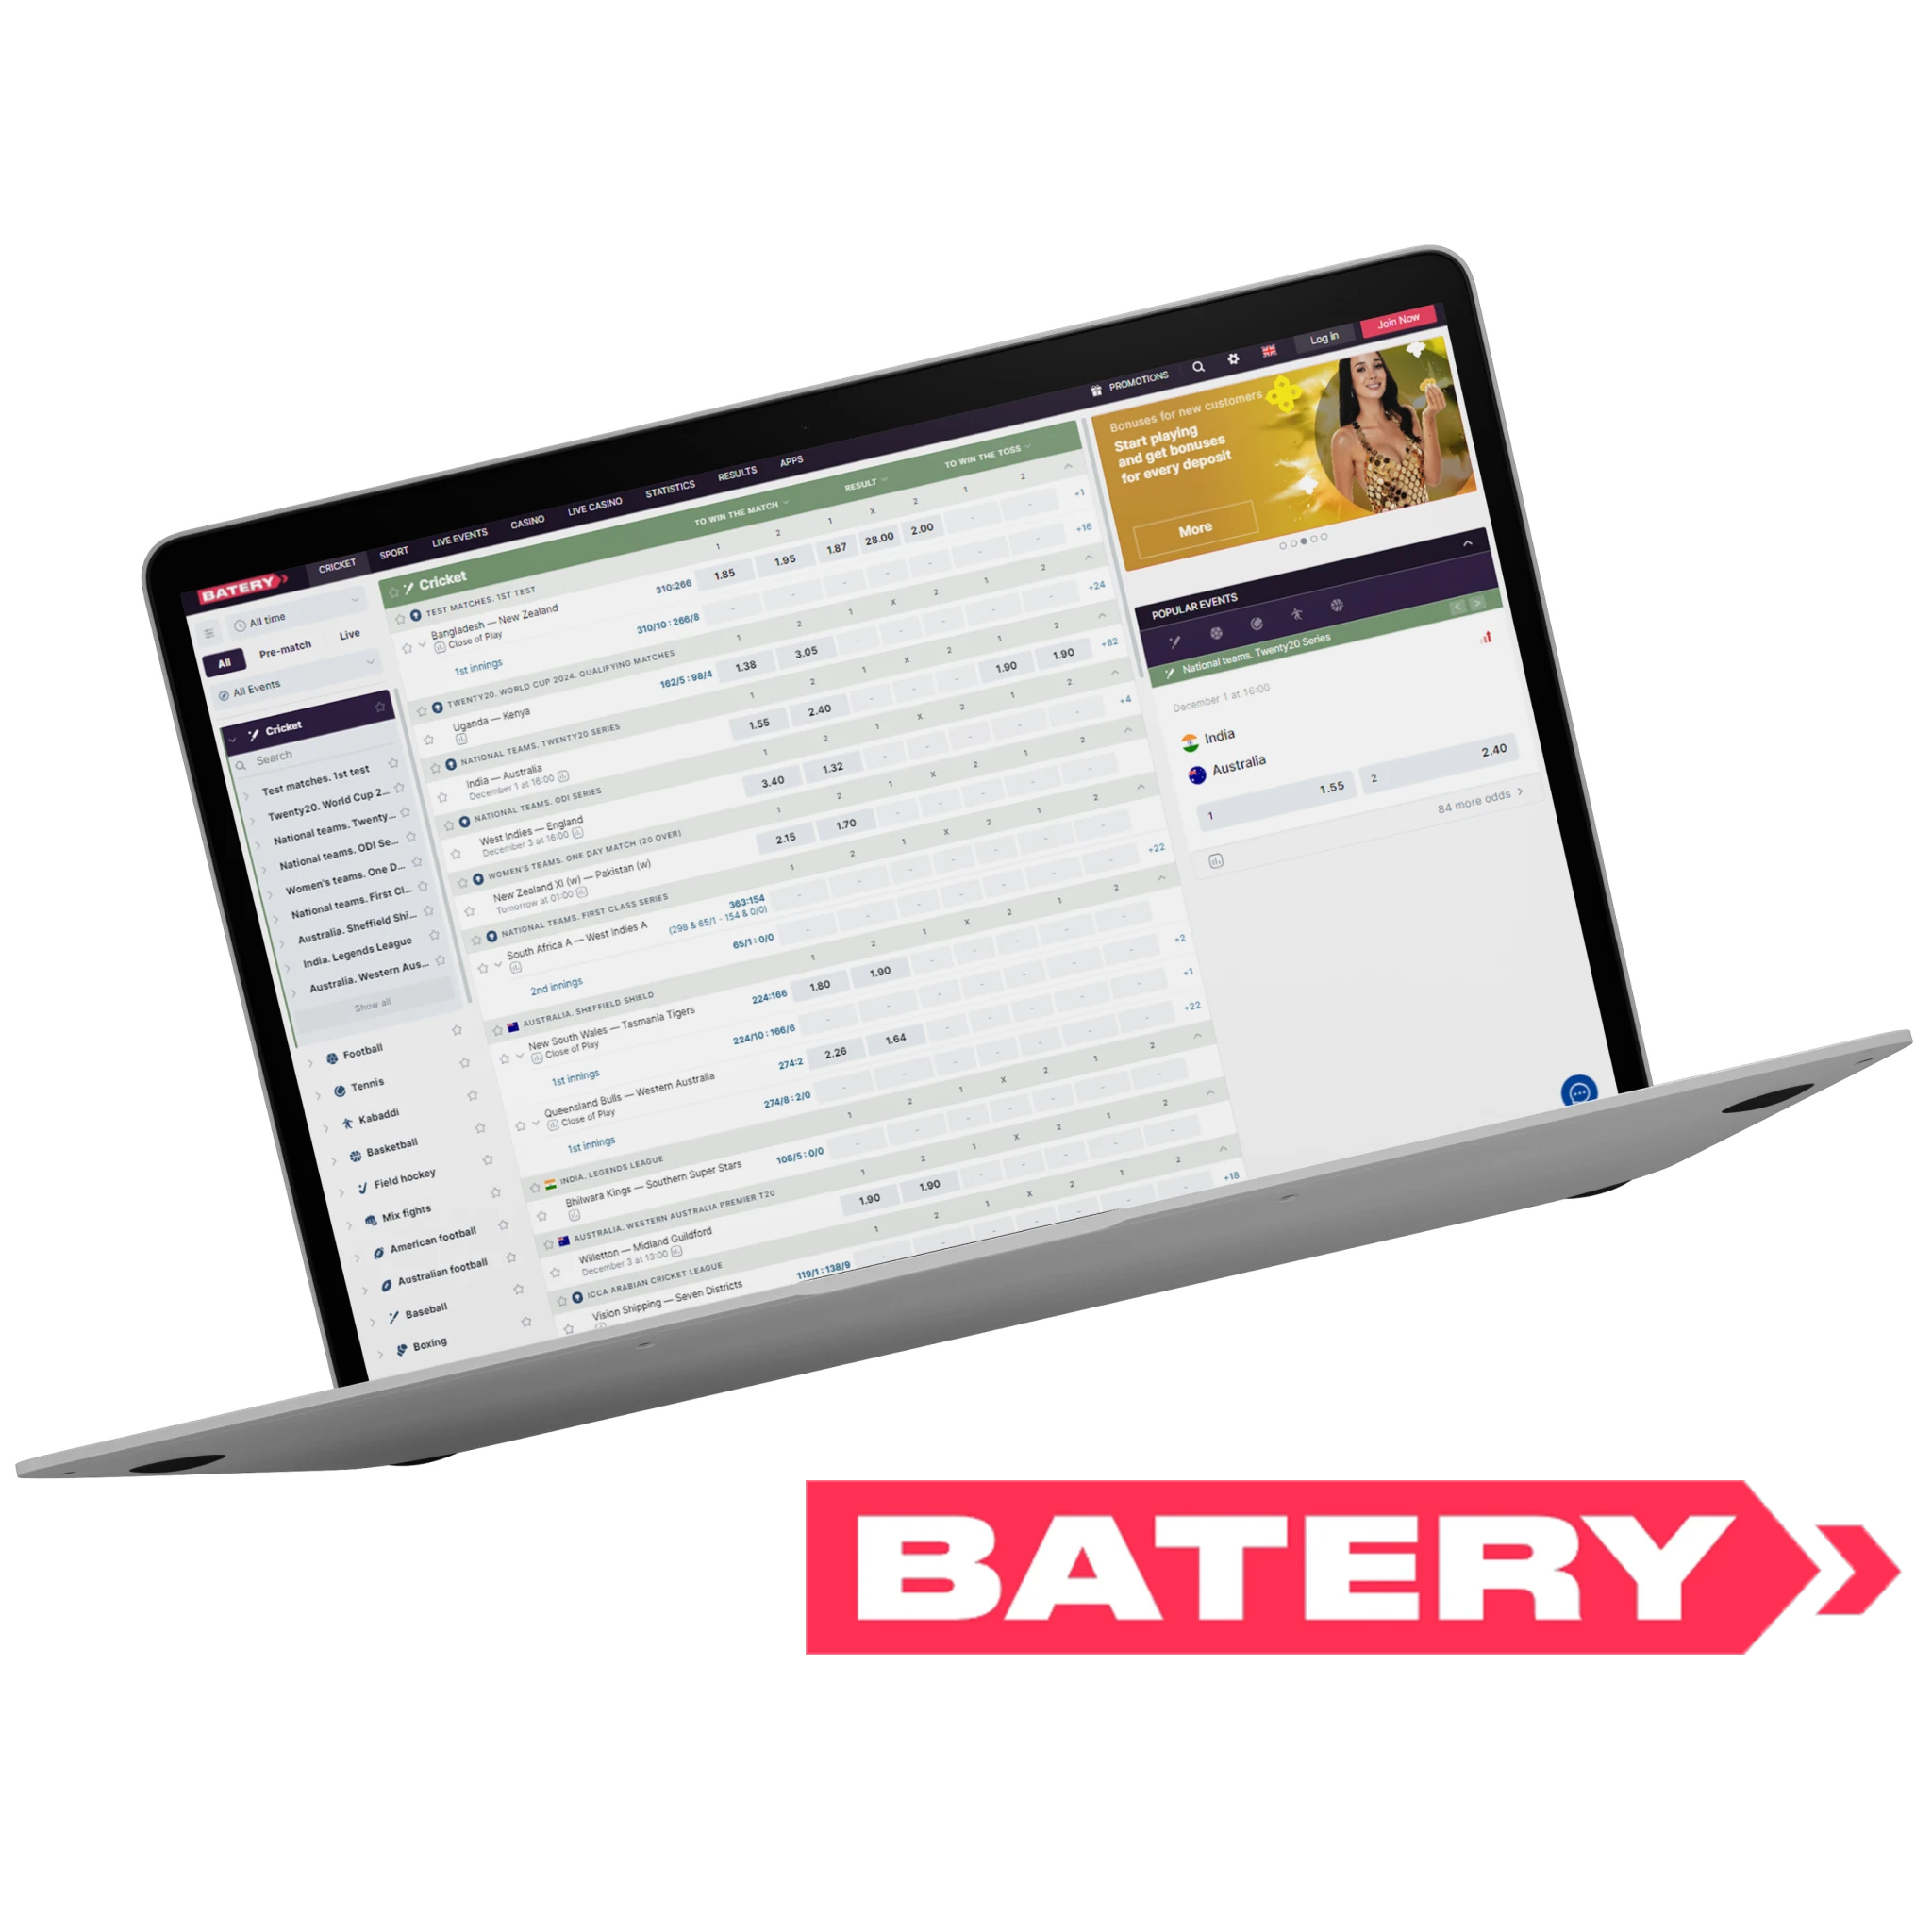 Get ready to elevate your excitement and take your cricket predictions to the next level with Batery.